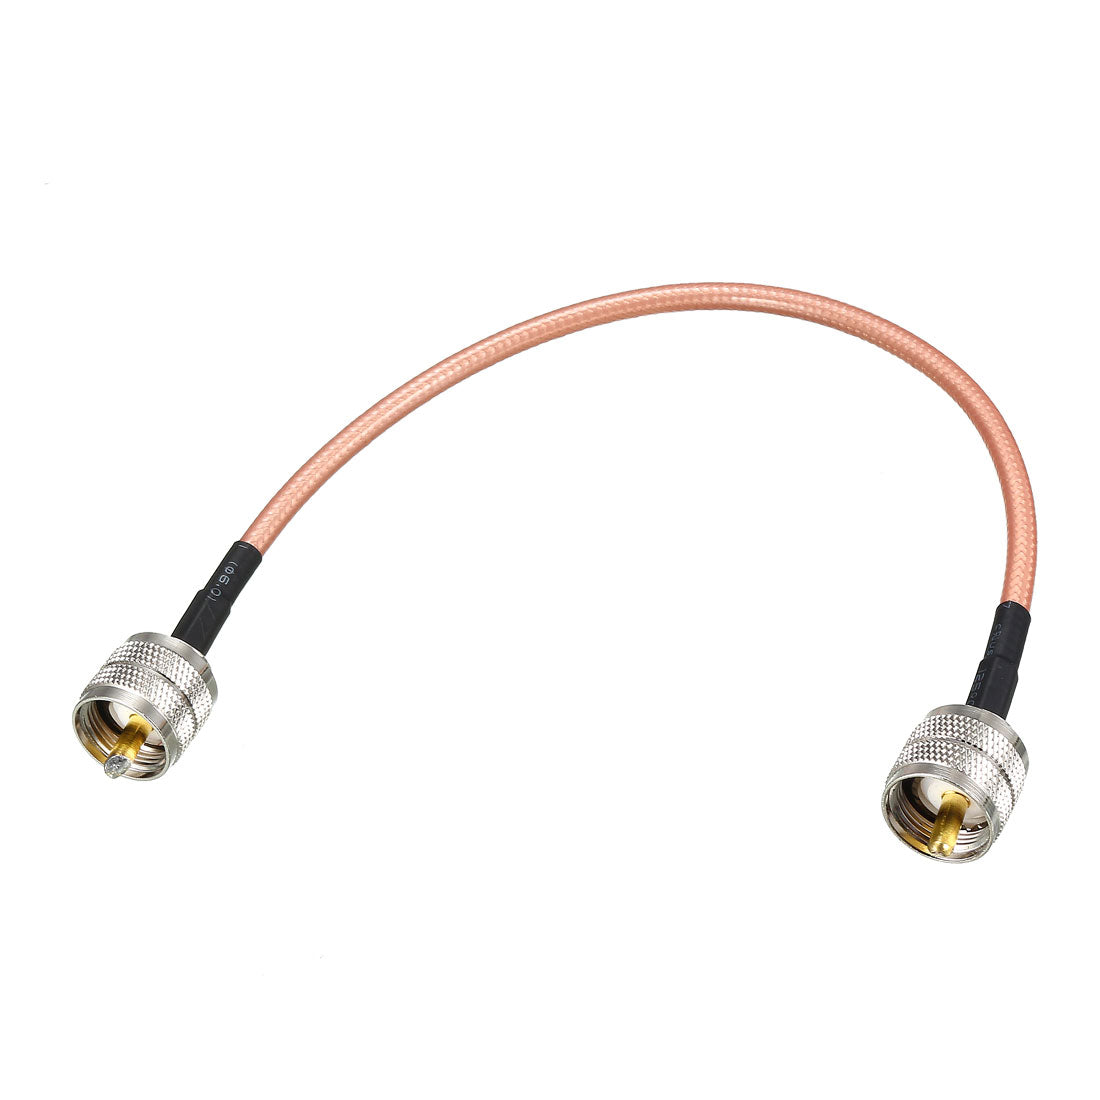 Uxcell Uxcell Low Loss RF Coaxial Cable Connection Coax Wire RG-142, PL-259 UHF Male to PL-259 UHF Male 30cm